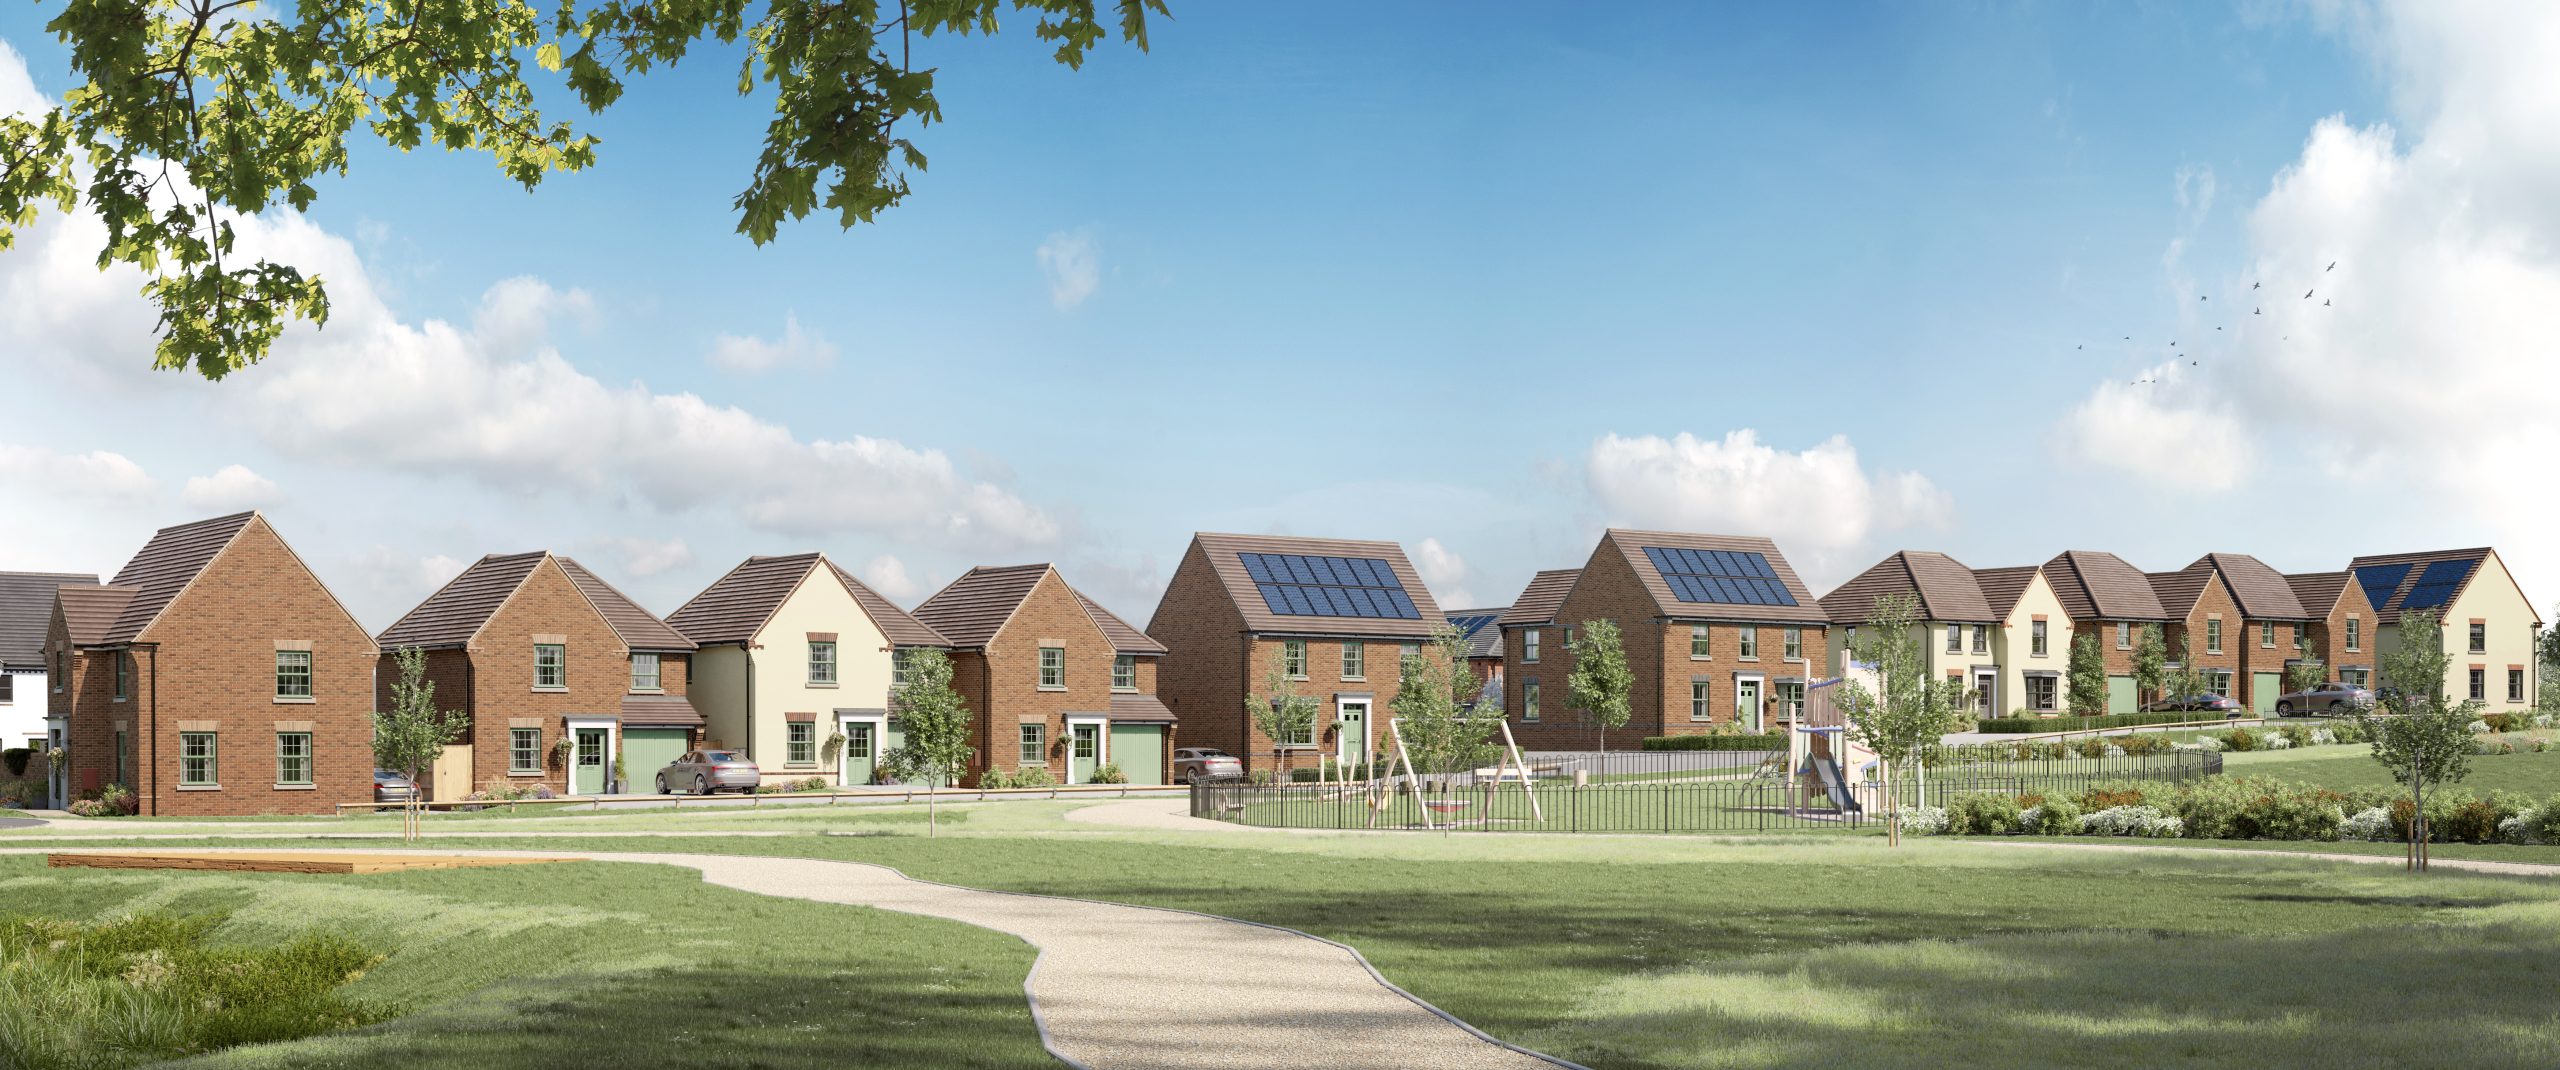 NEWS | More than 200 new homes for Ross-on-Wye ⁠— with the opening of The Orchards